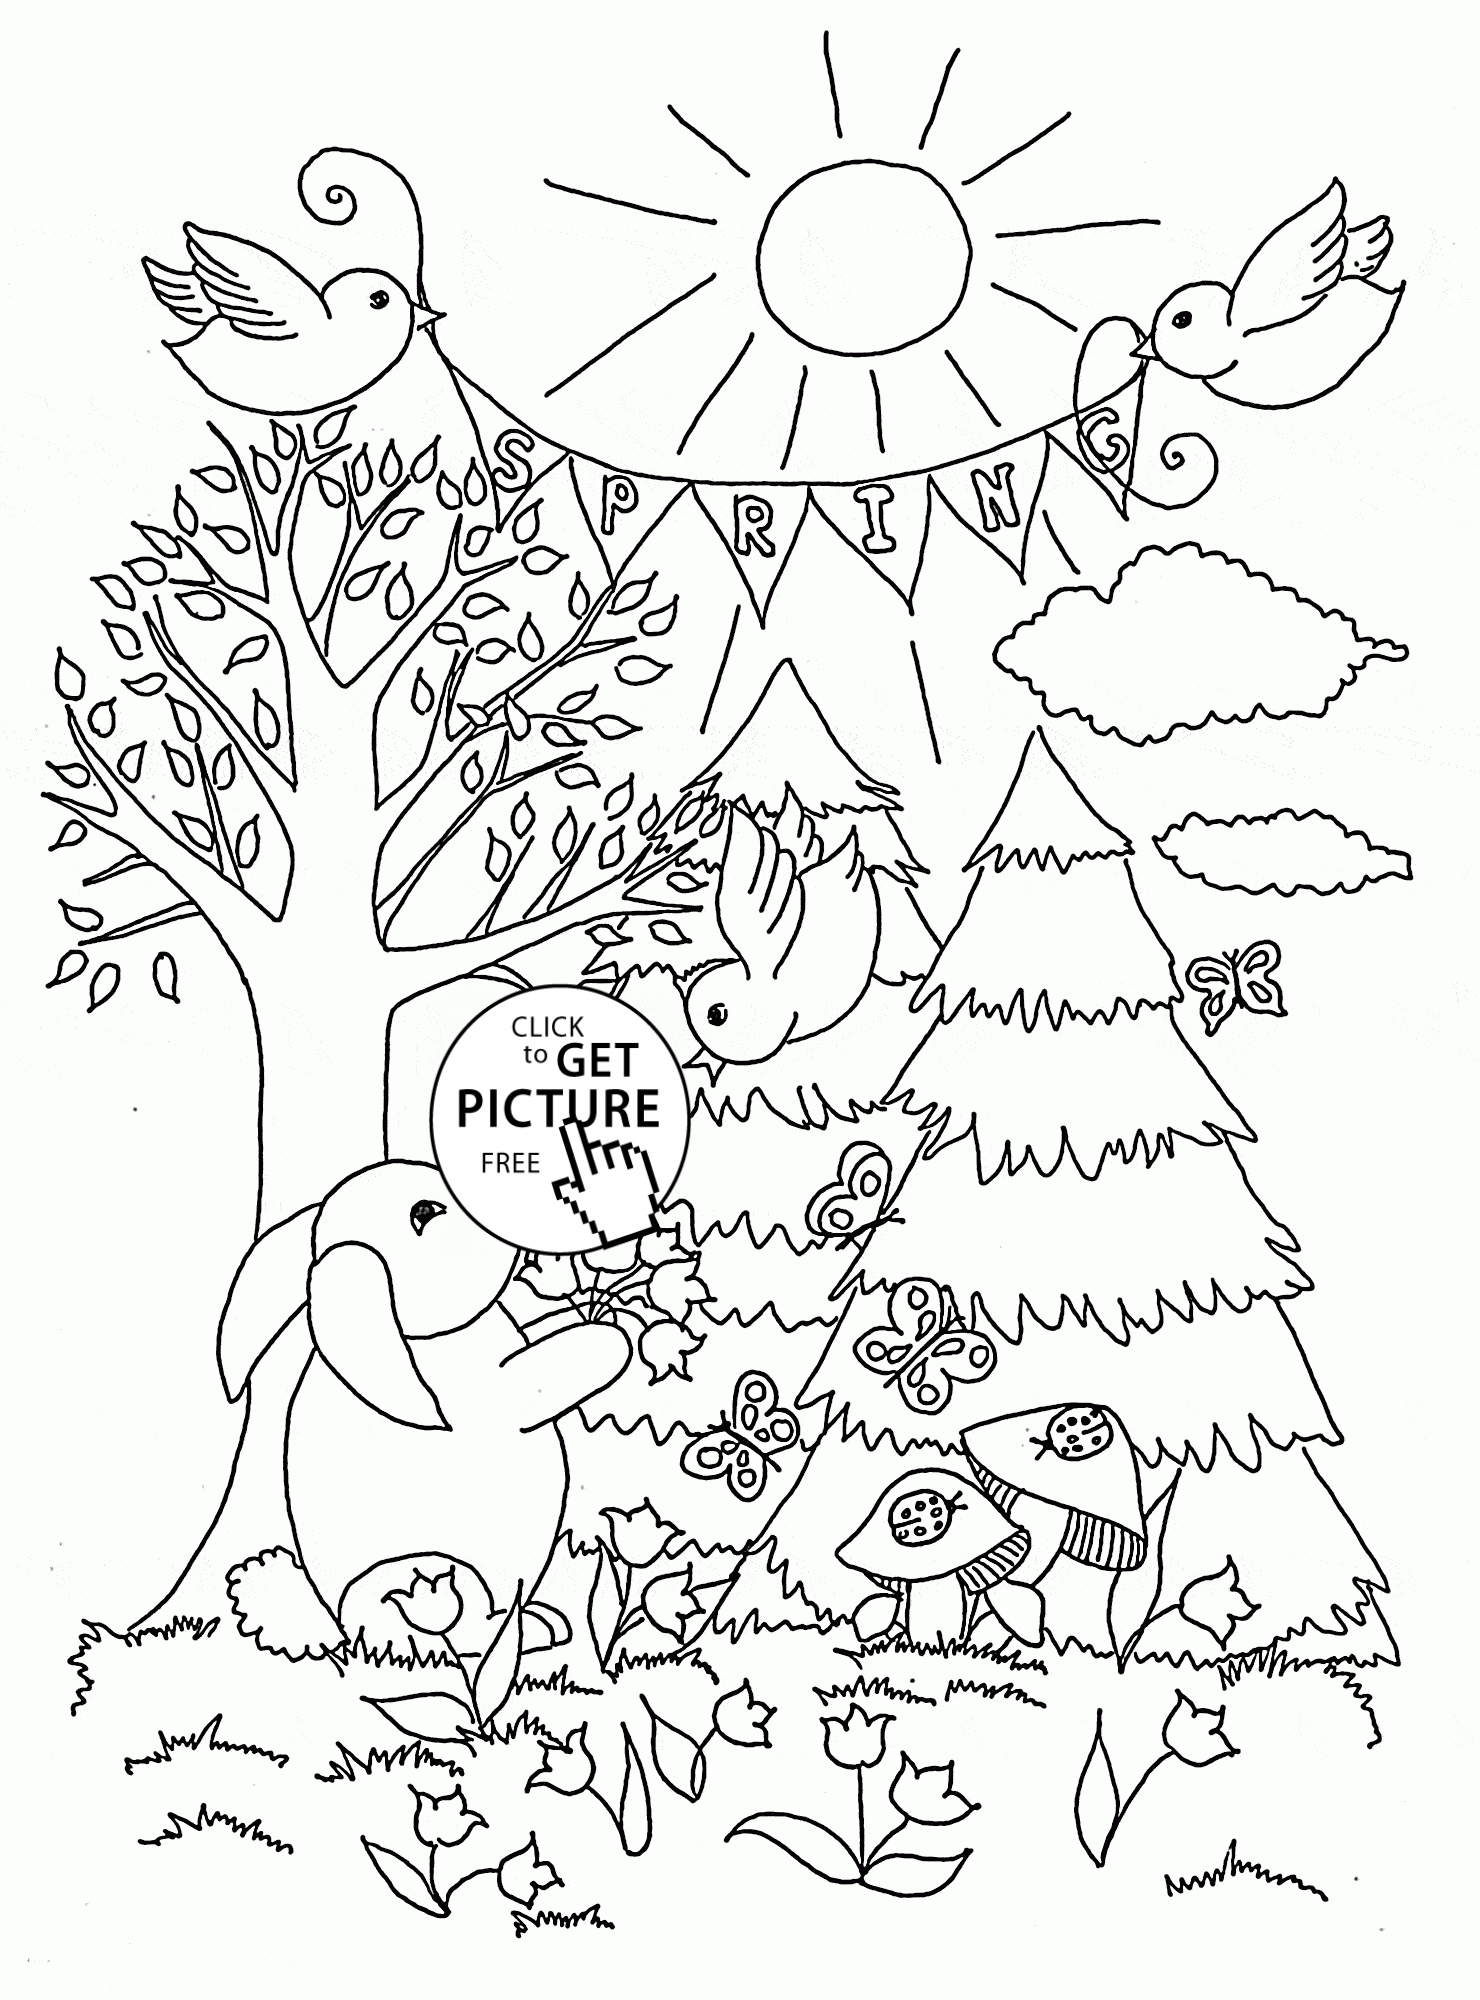 Spring in Forest coloring page for kids, seasons coloring pages